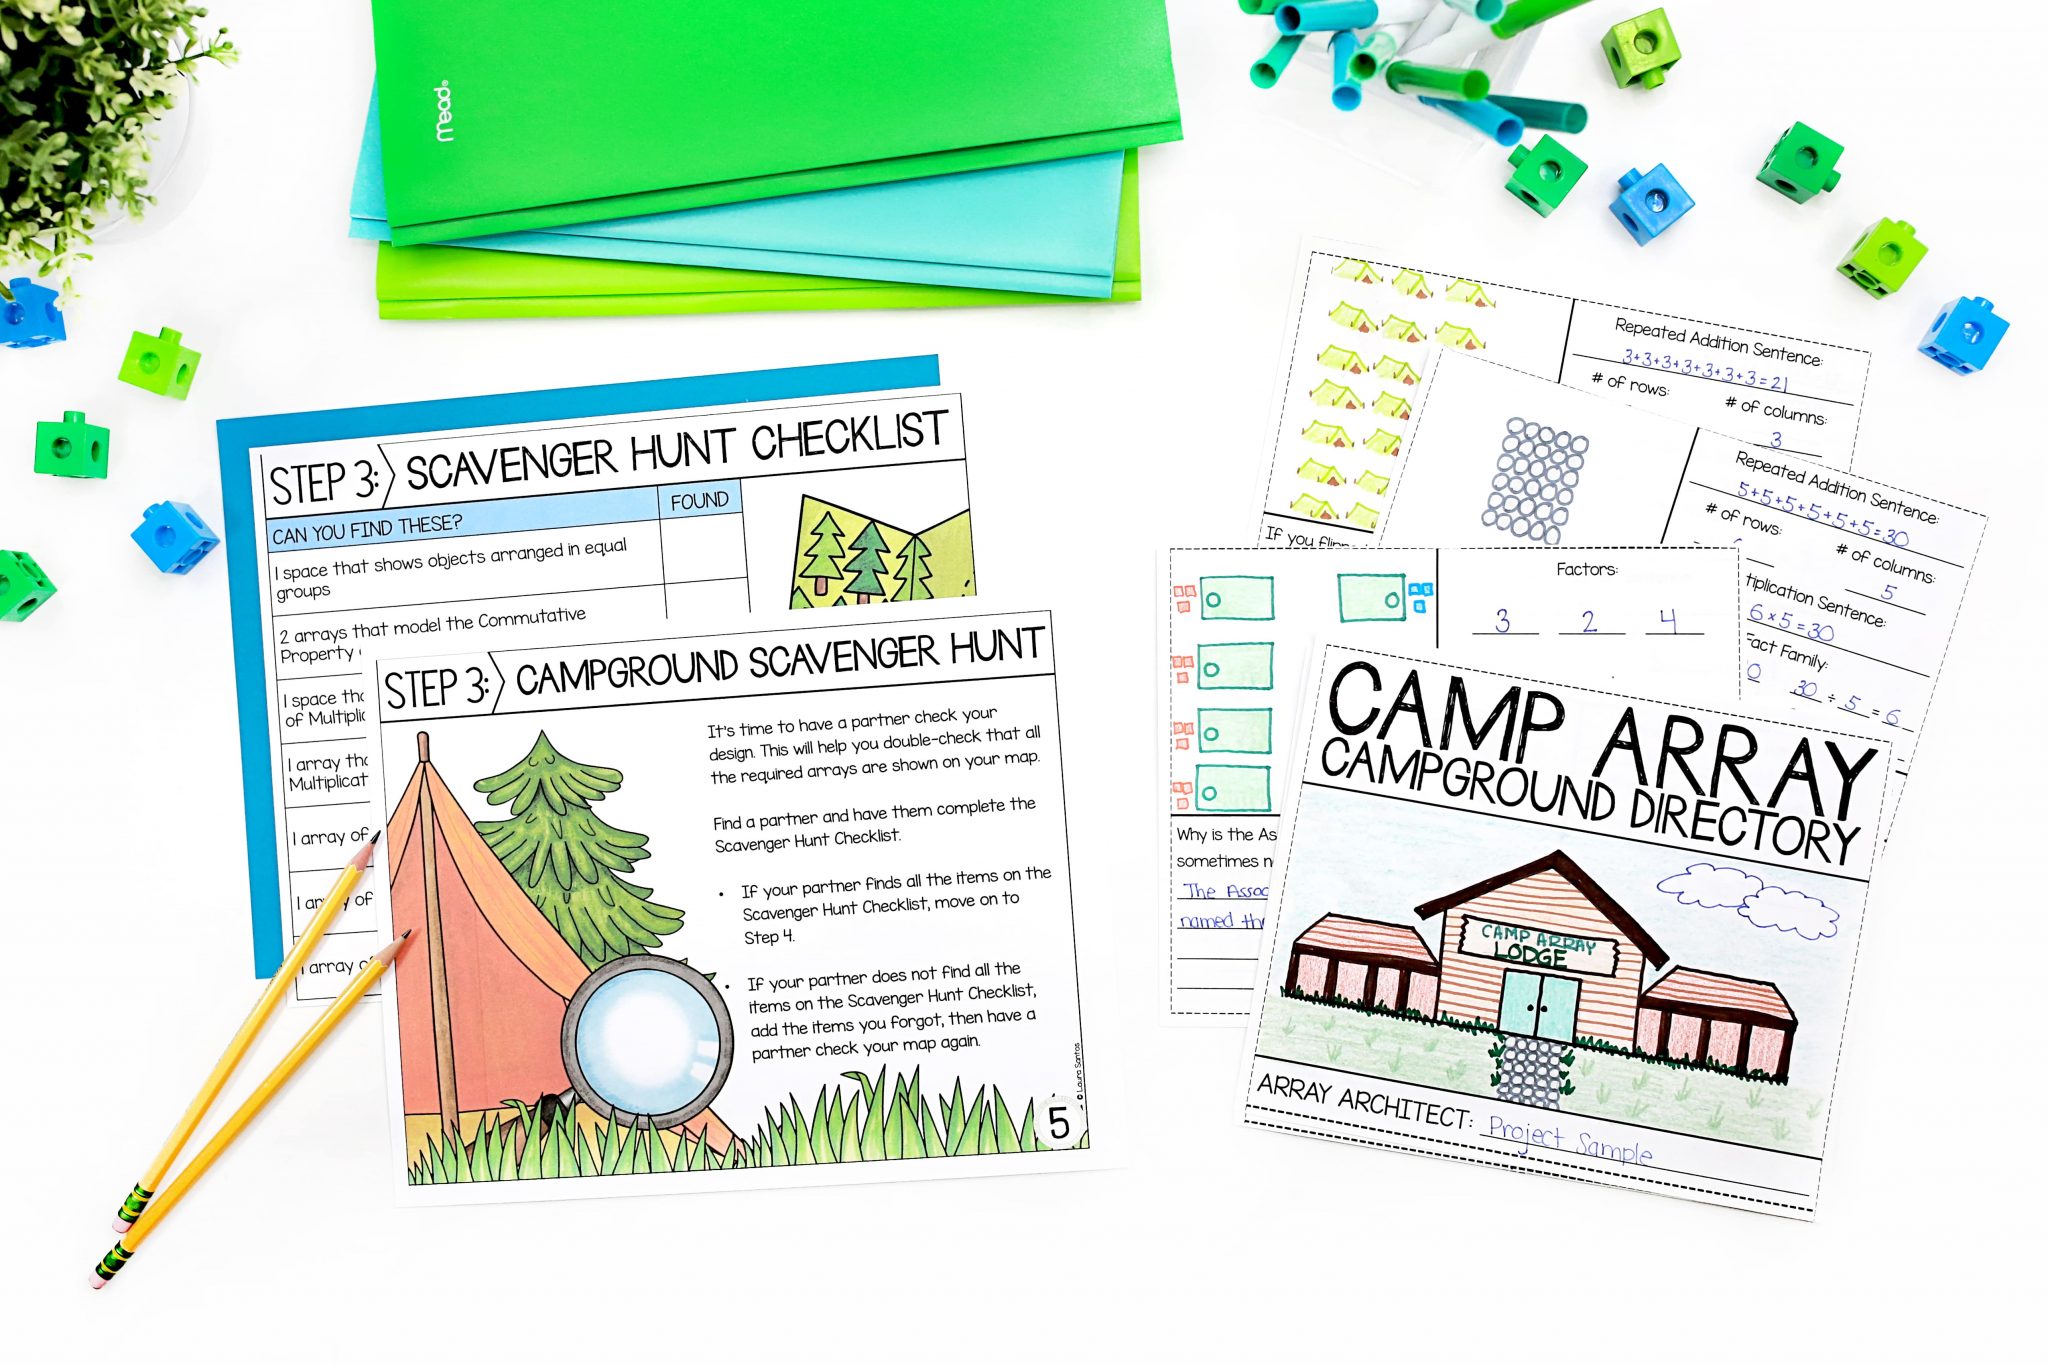 Core Inspiration's Camp Array Architect Math Project guide with detailed visual instructions laying next to completed multiplication project sample. 